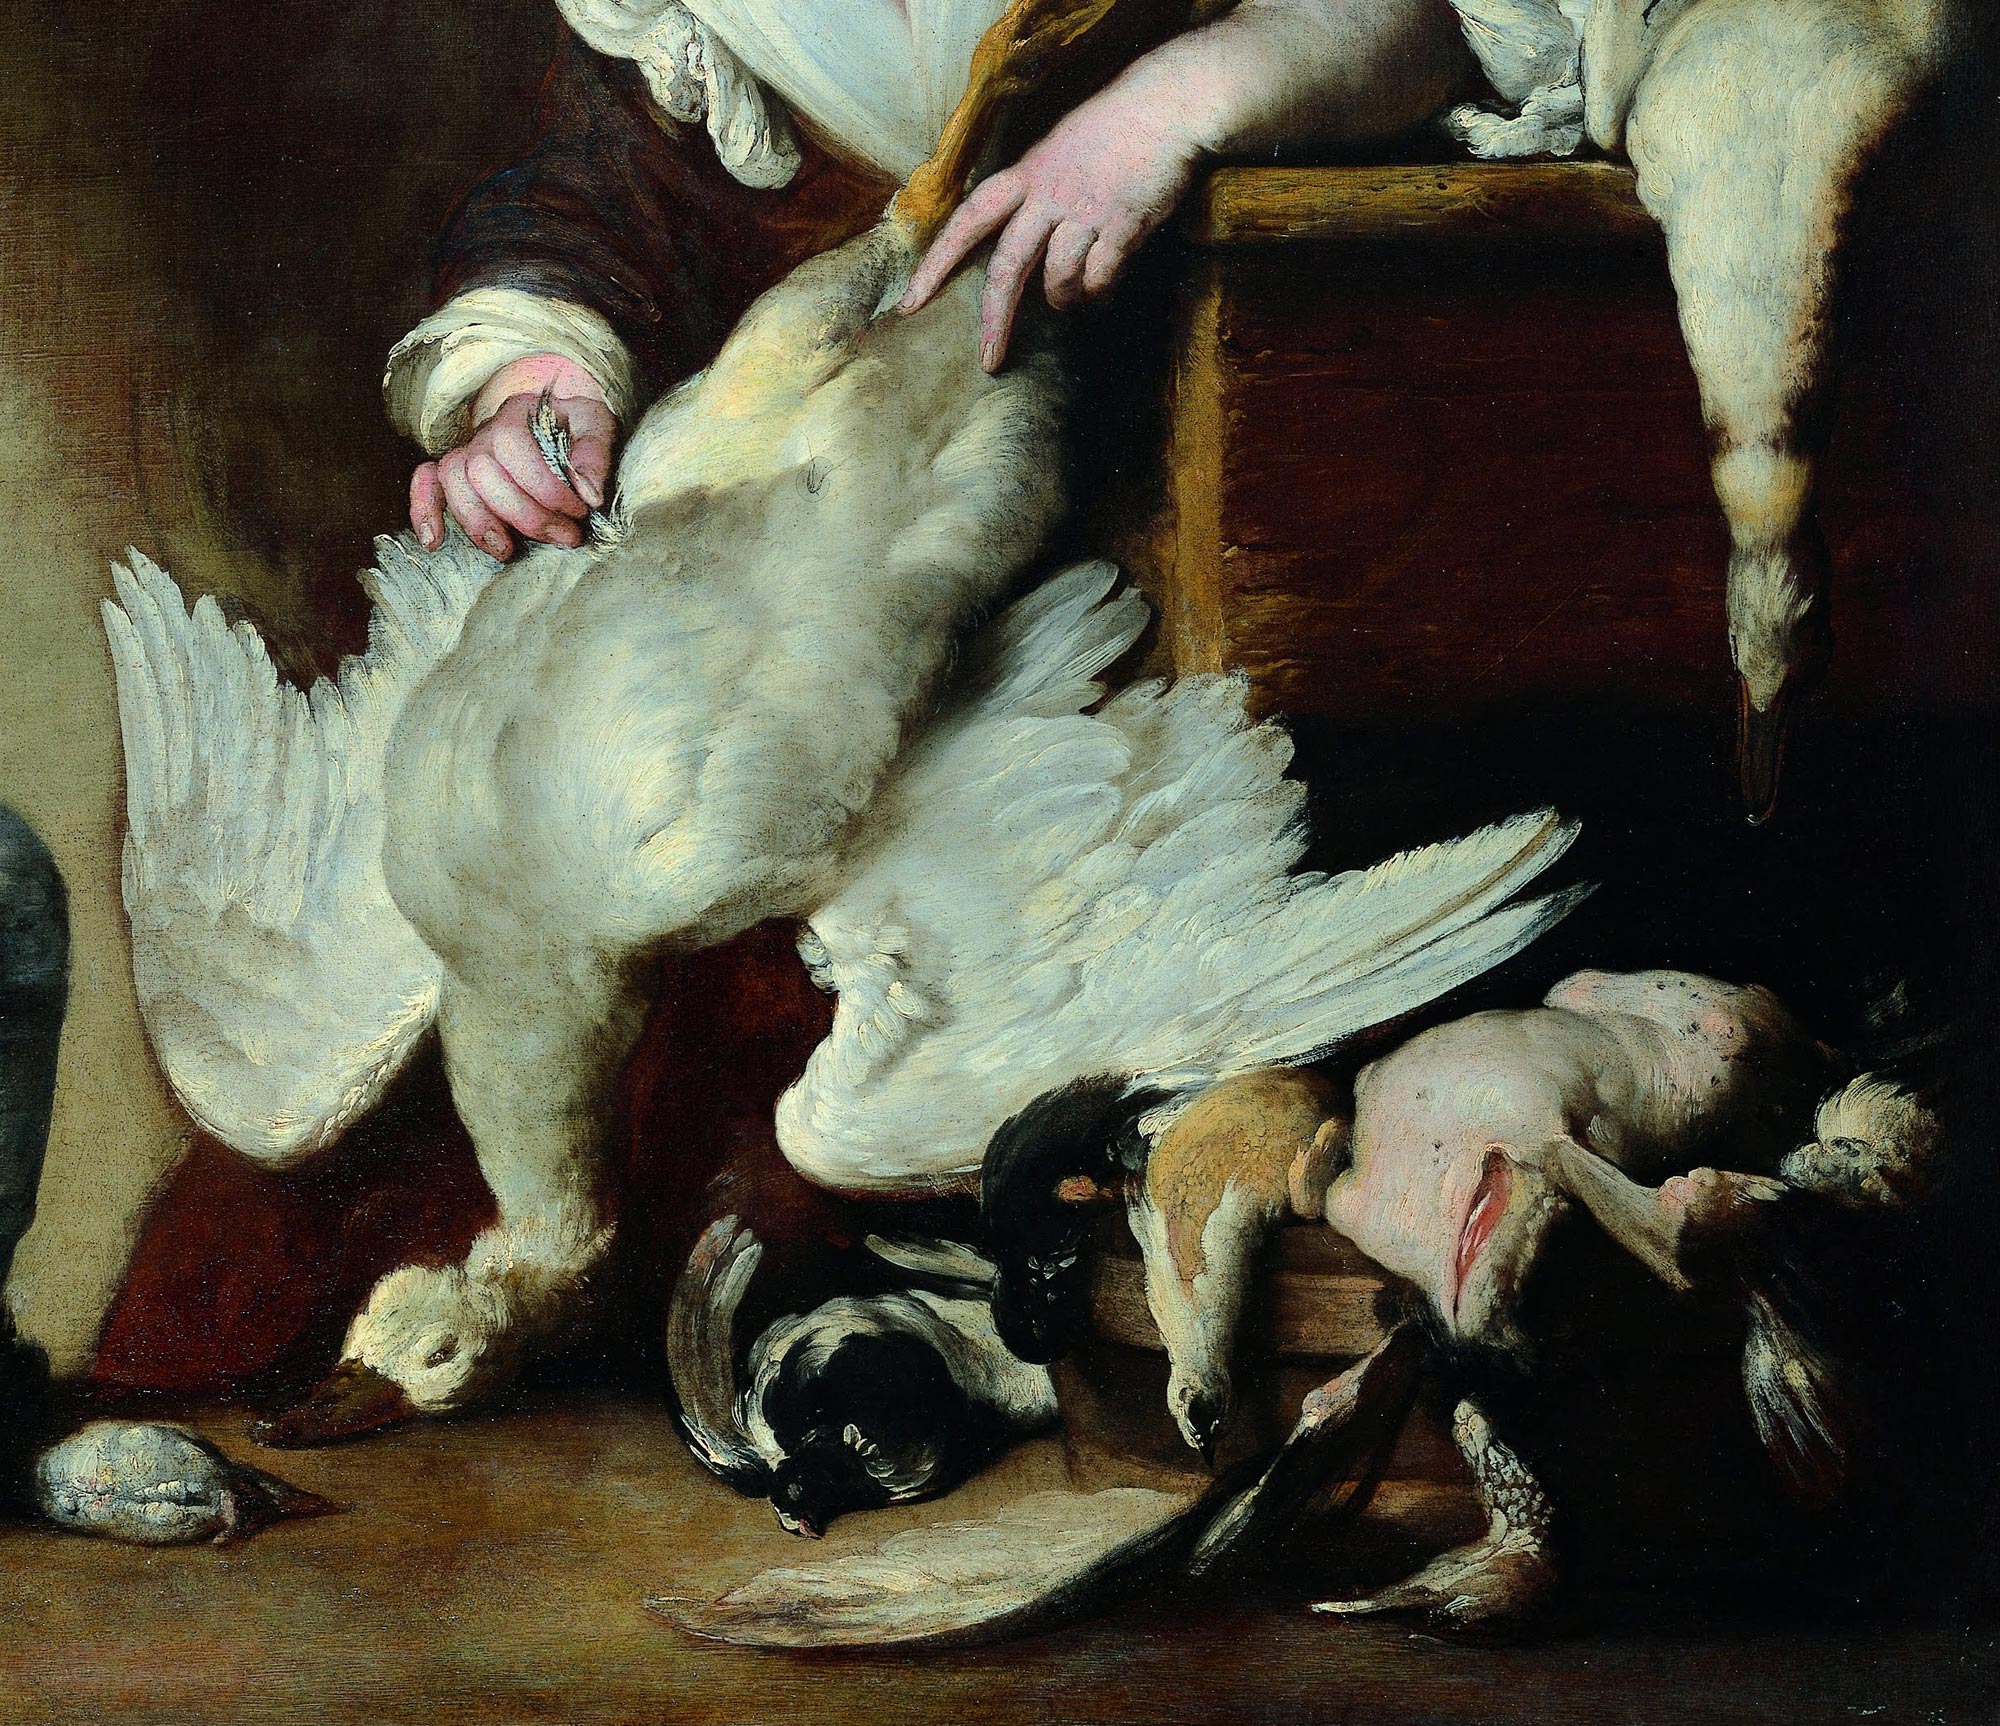 Bernardo Strozzi, The Cook, detail of the plumage of the goose